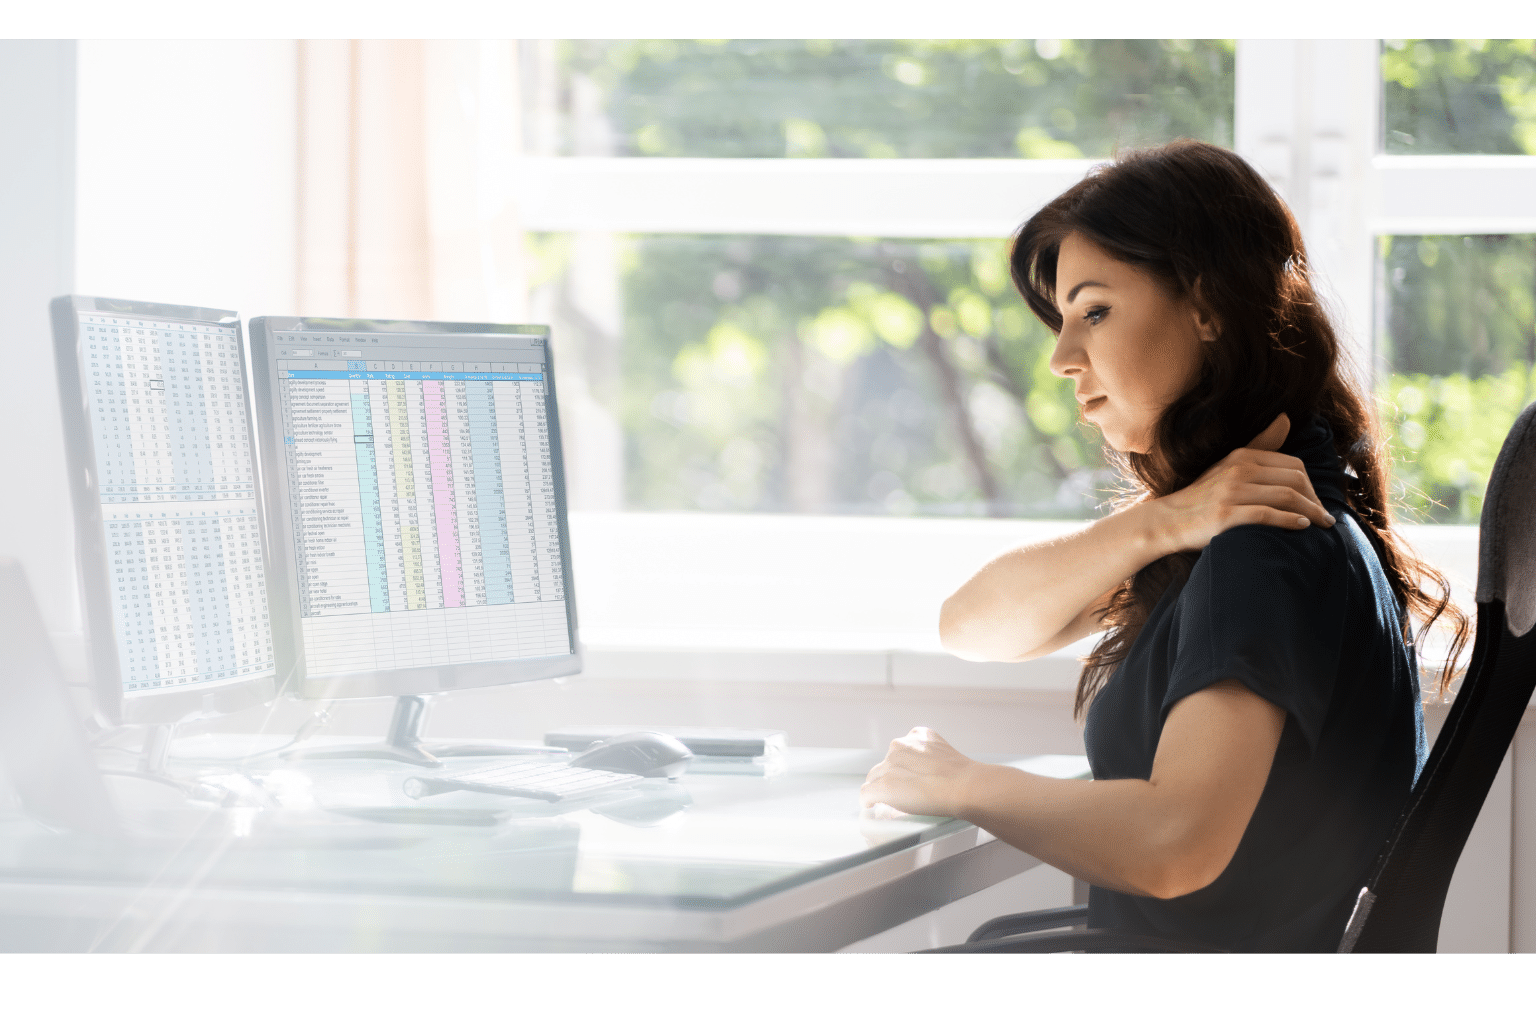 Dual screen ergonomics: How to avoid neck pain when working with multiple screens